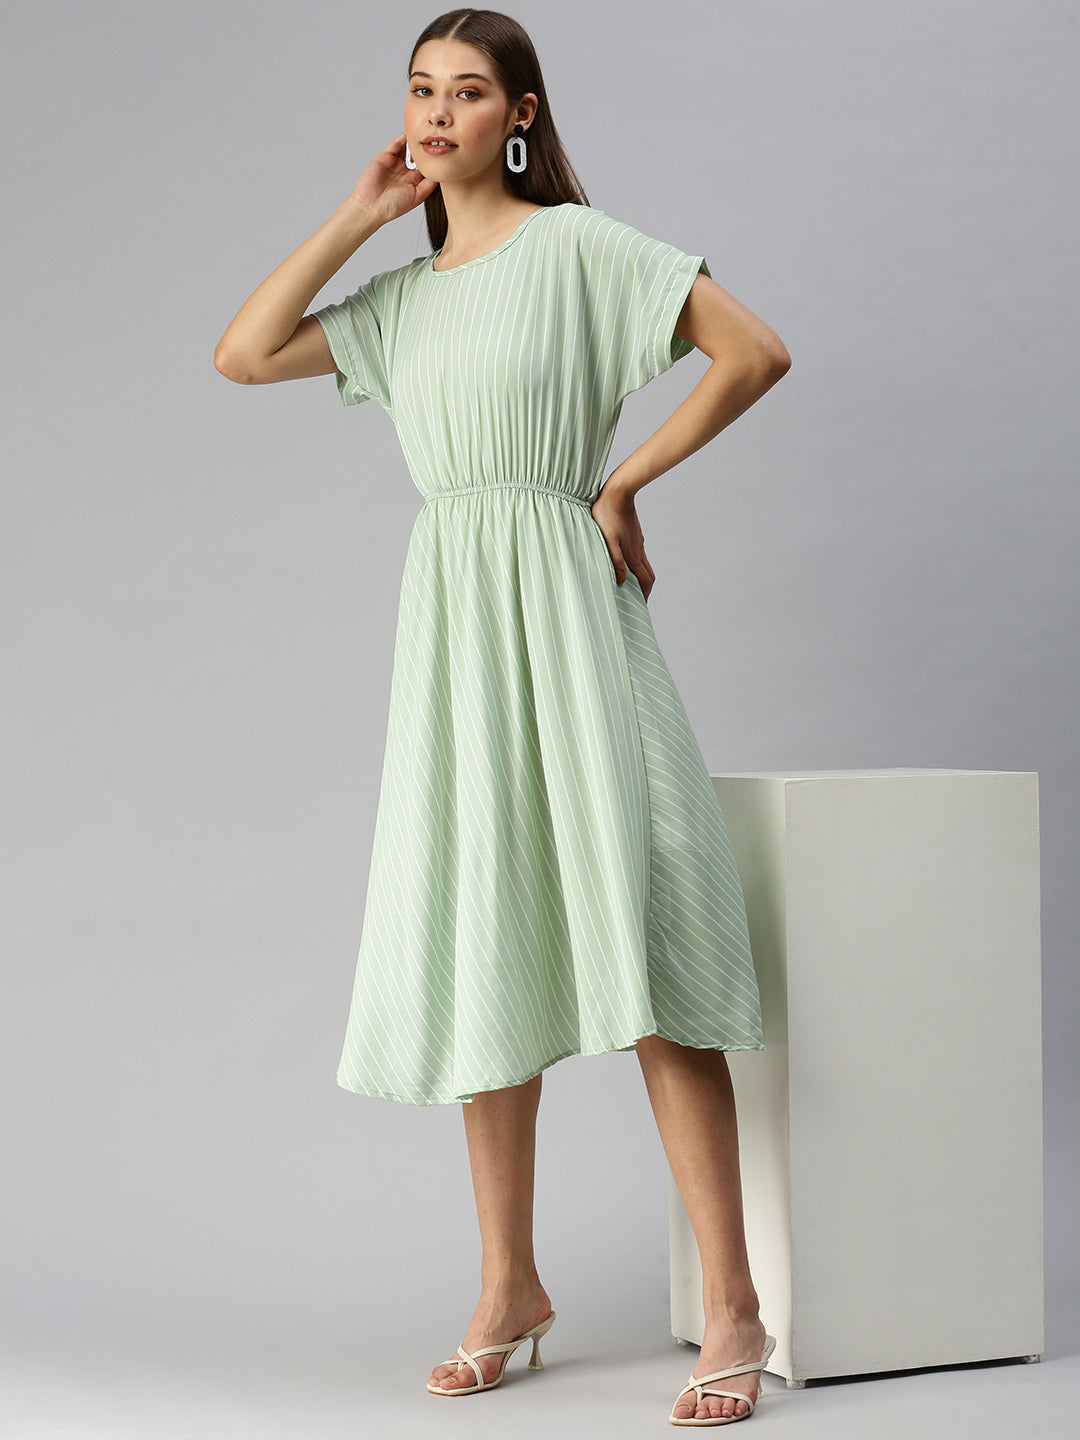 Women's Green Striped Fit and Flare Dress